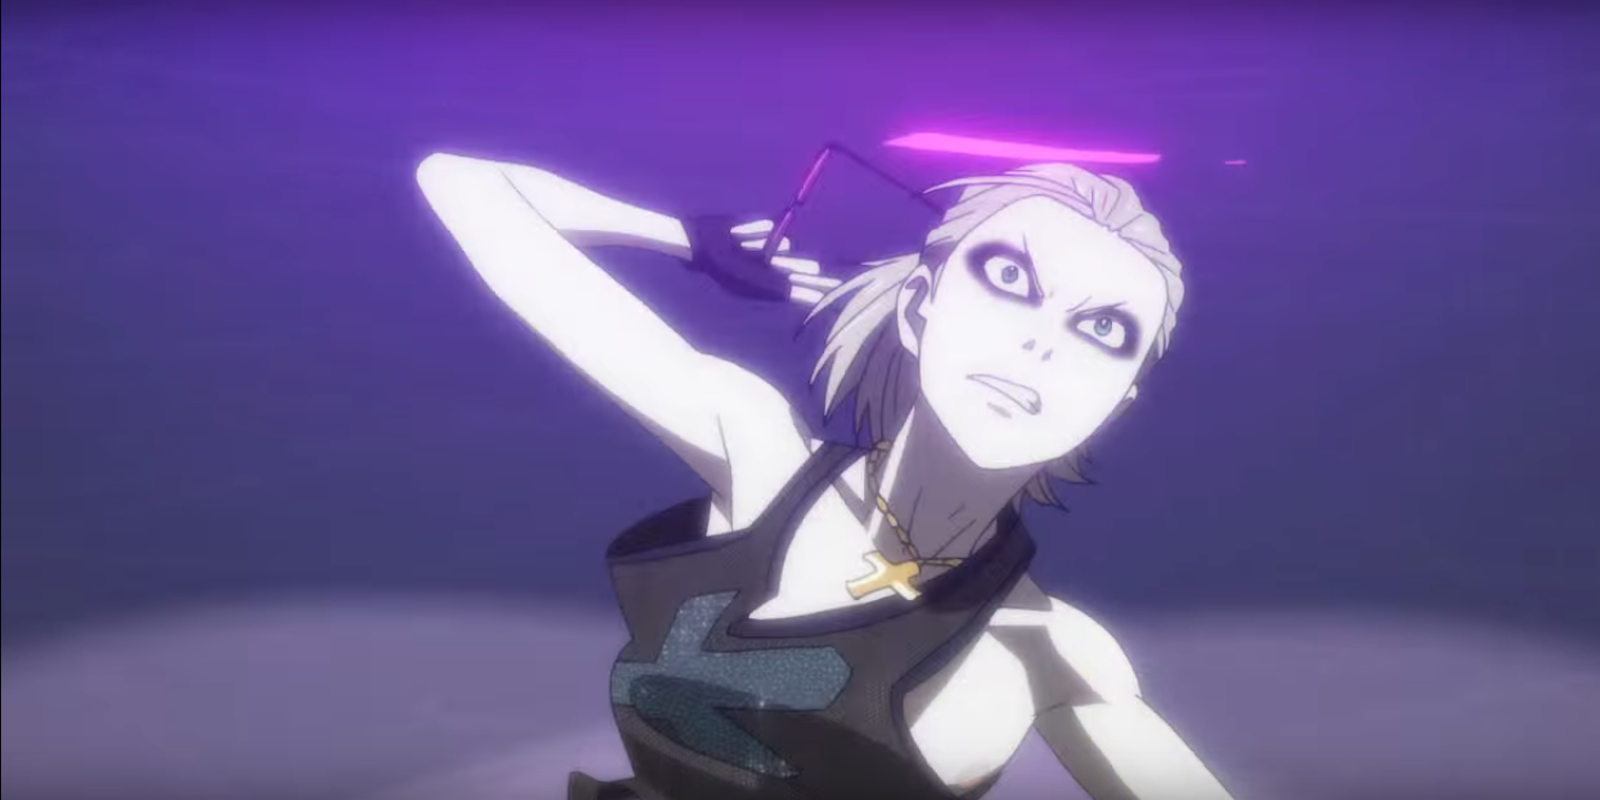 New Yuri on Ice clip: Yuri Plisetsky's Welcome to the Madness